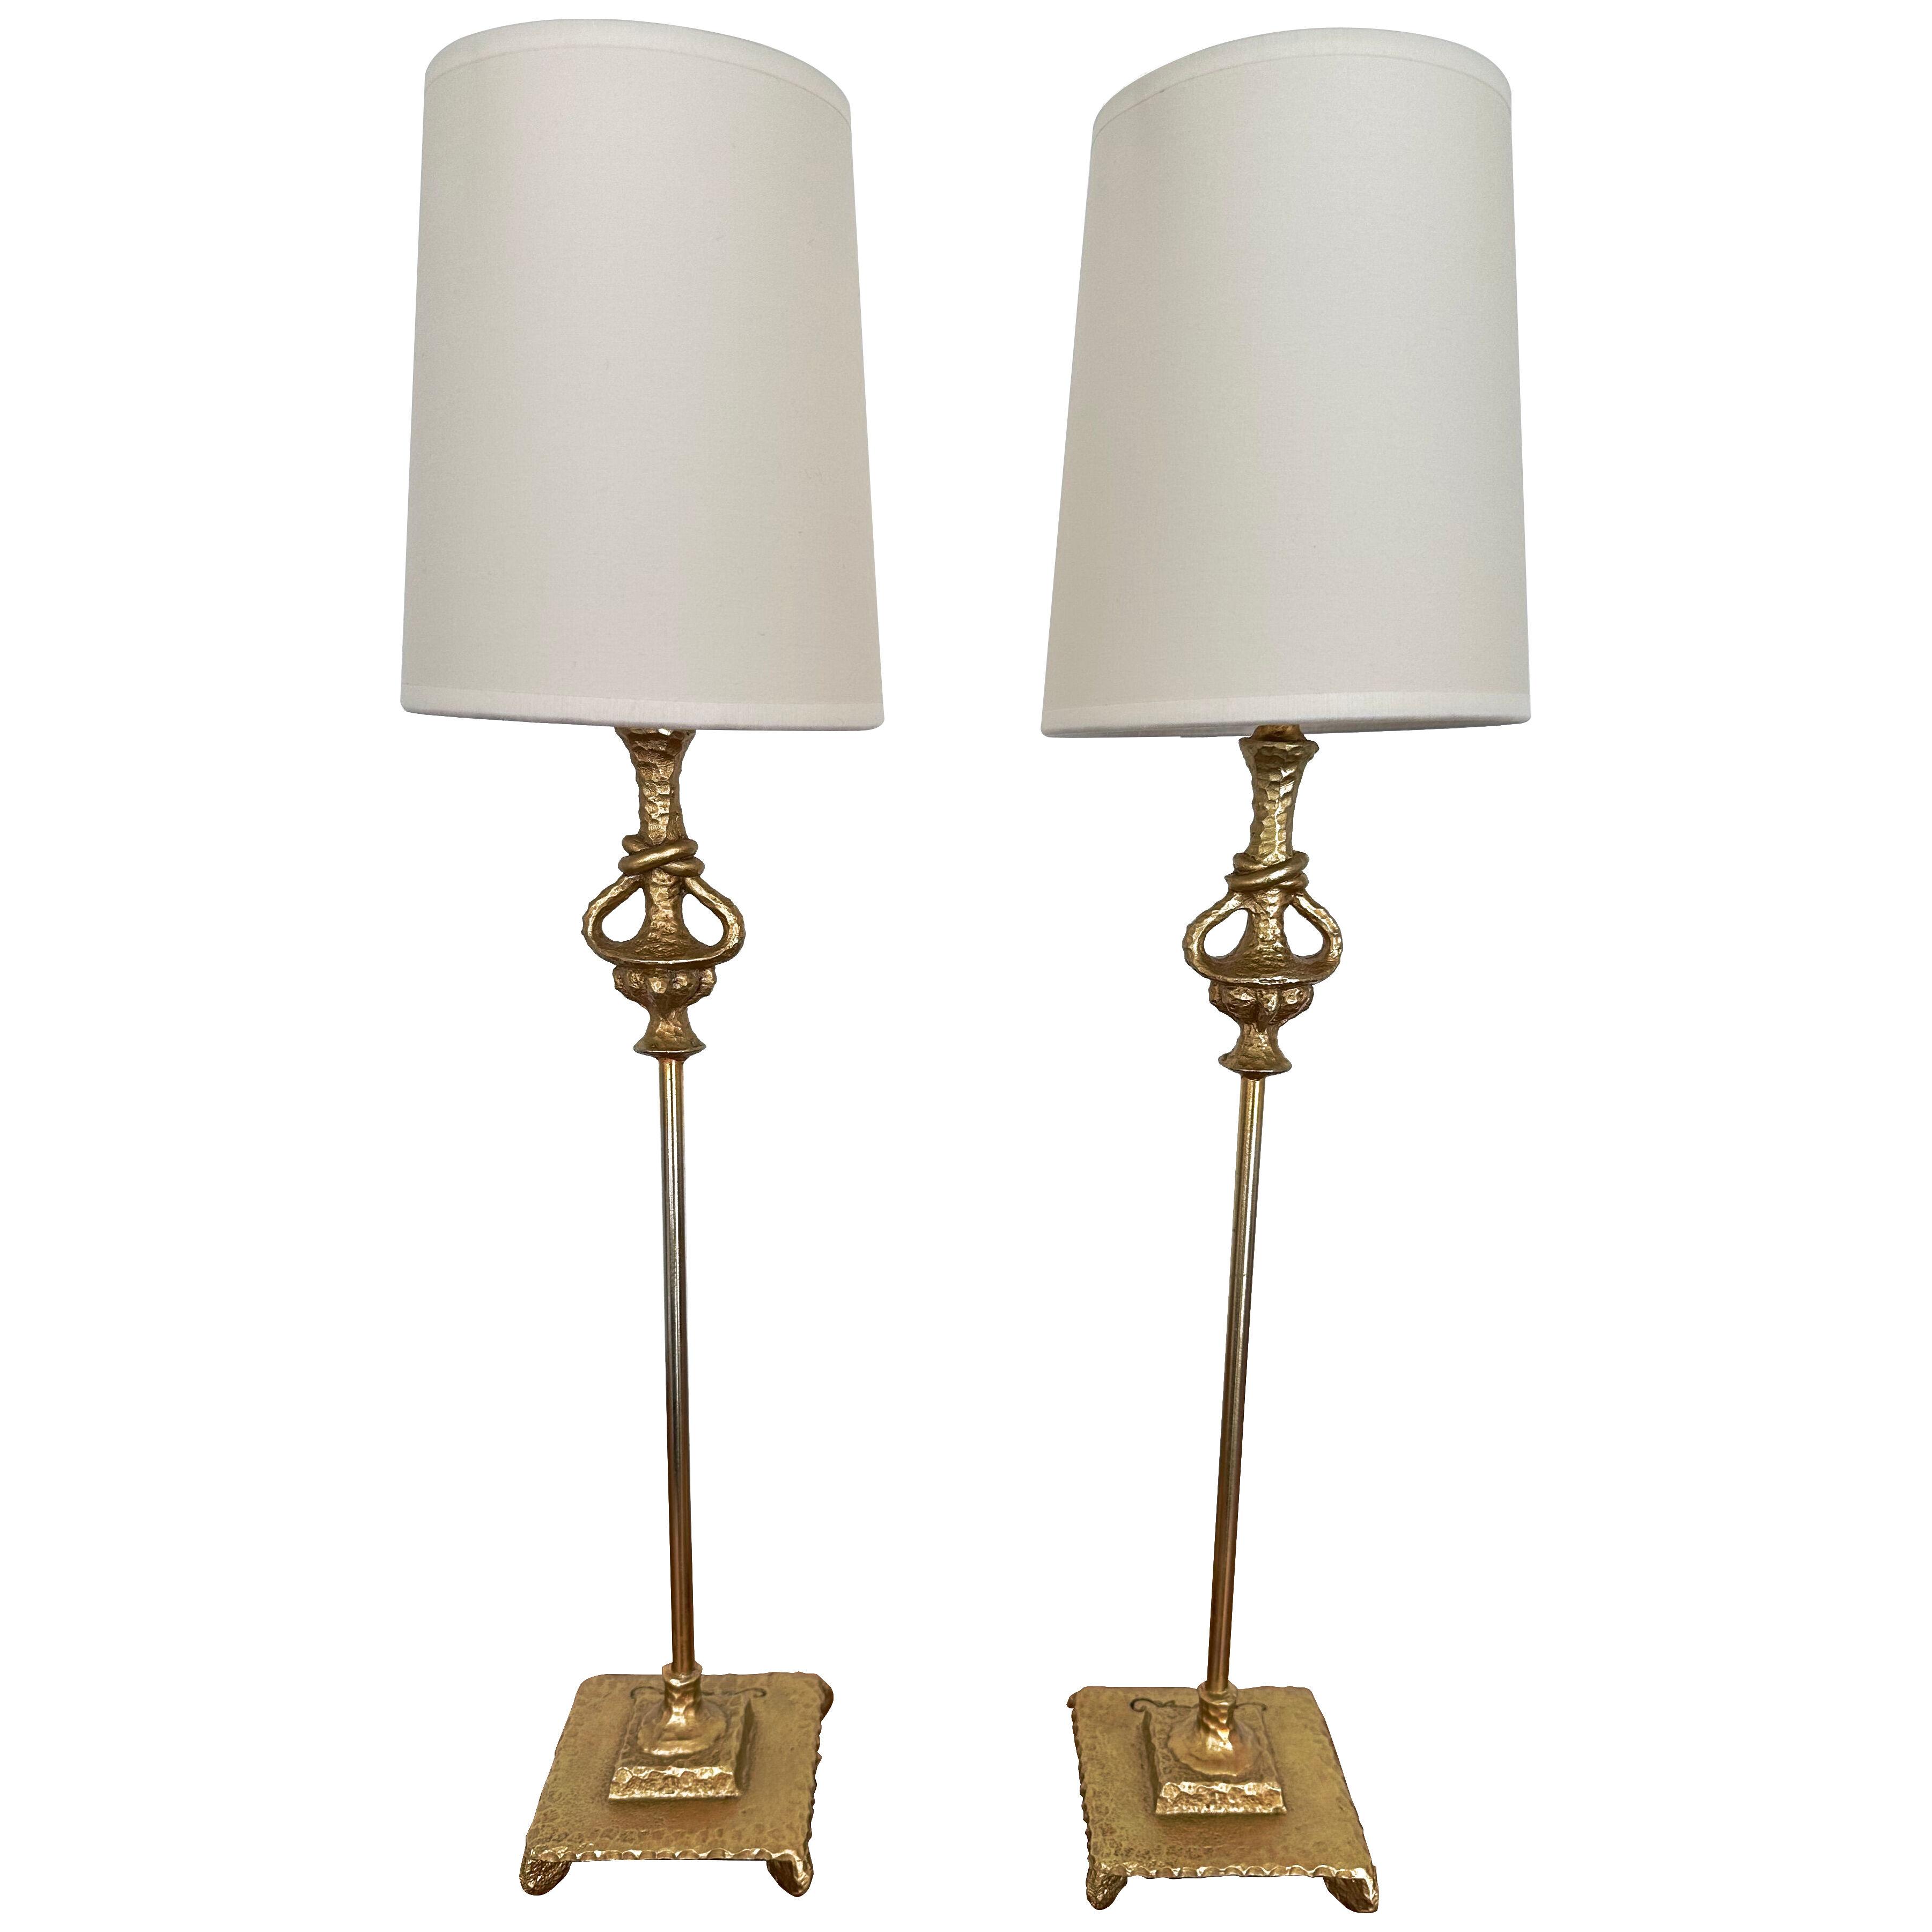 Pair of Lamps by Nicolas Dewael for Fondica, France, 1990s